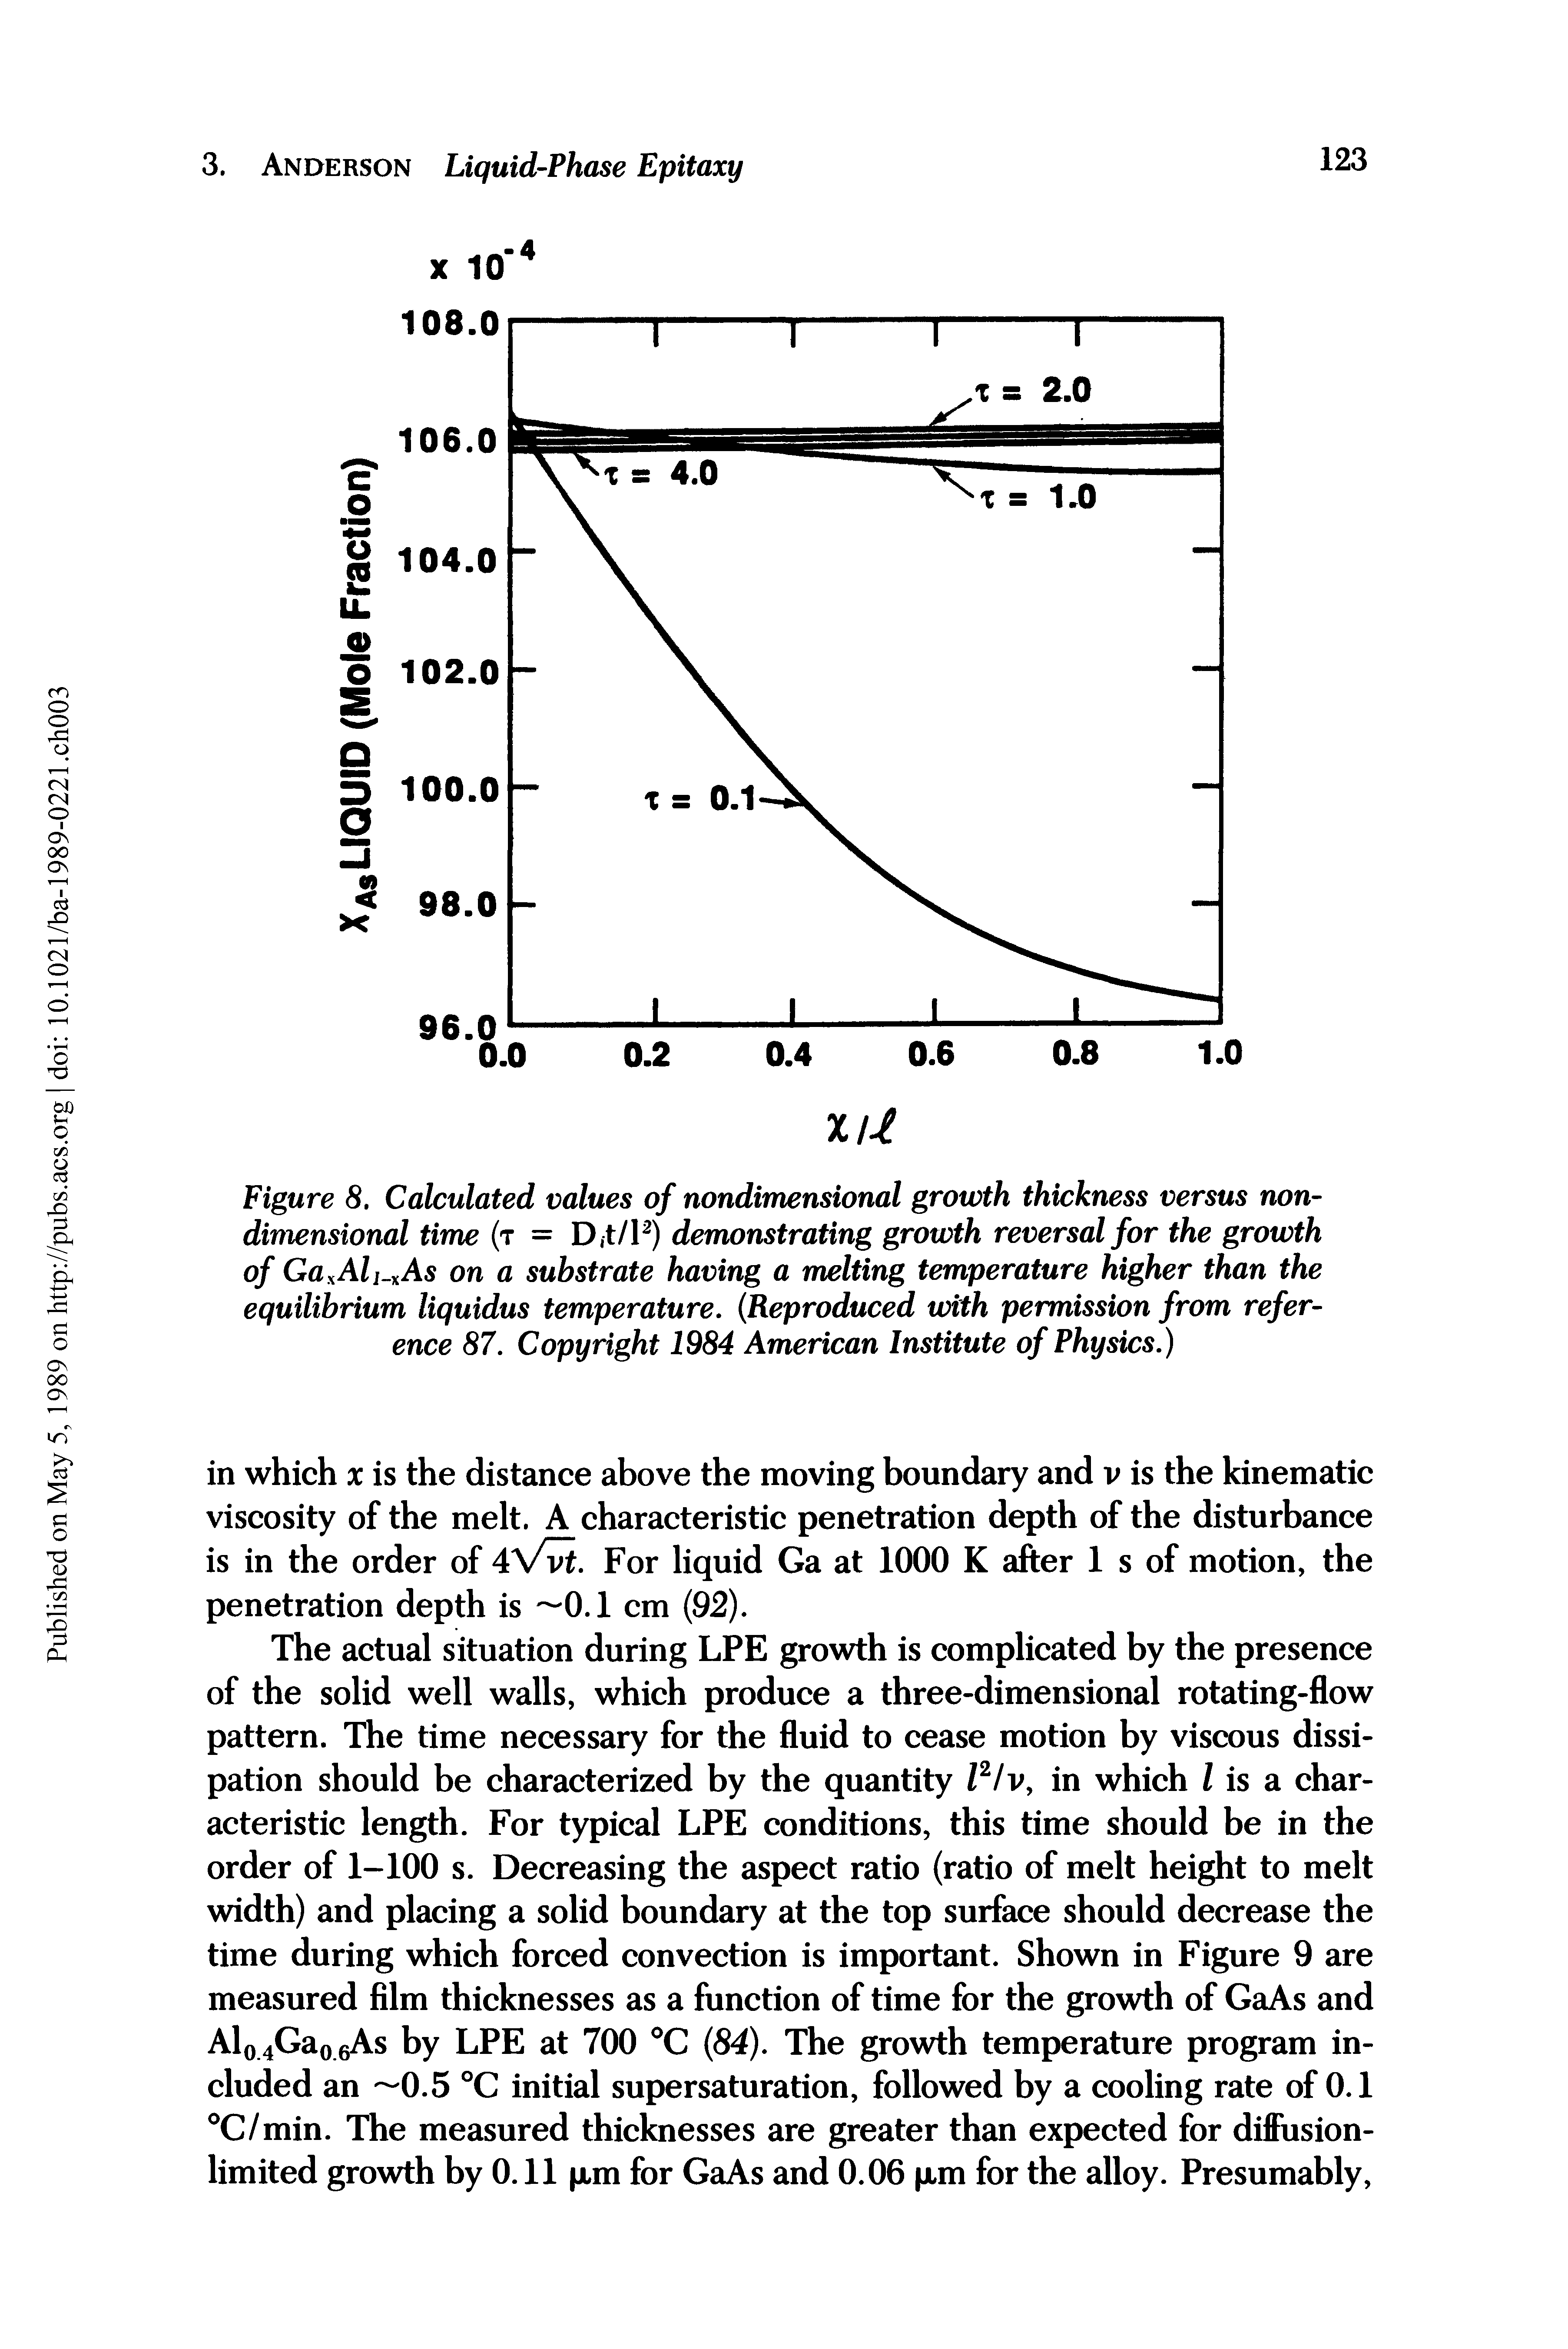 Figure 8. Calculated values of nondimensional growth thickness versus non-dimensional time (t = D,t/12) demonstrating growth reversal for the growth of GaKAh-xAs on a substrate having a melting temperature higher than the equilibrium liquidus temperature. (Reproduced with permission from reference 87. Copyright 1984 American Institute of Physics.)...